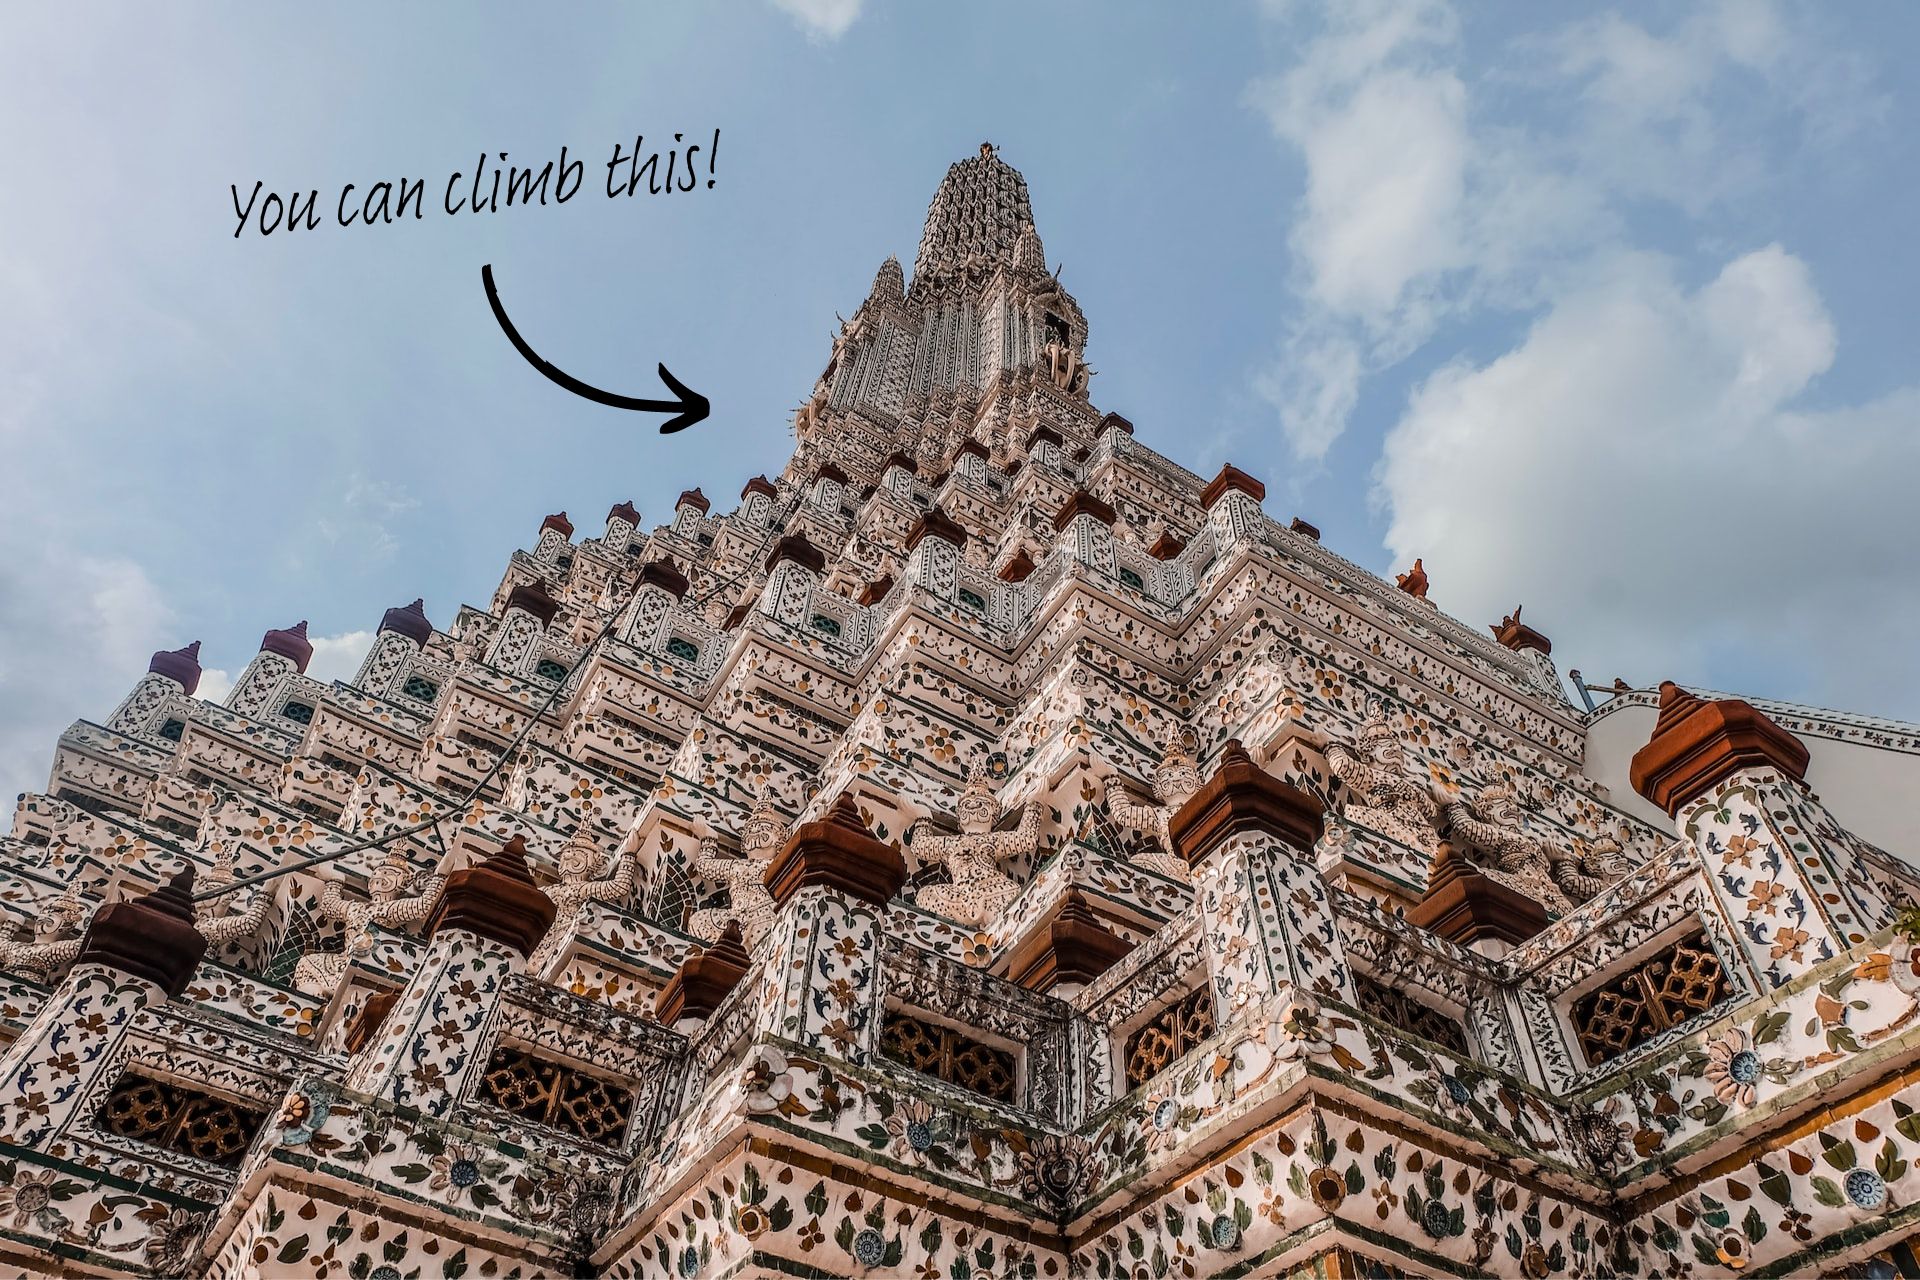 What to expect on your first trip to Bangkok: A picture of Wat Arun, with the words 'You can climb this!' written above it.